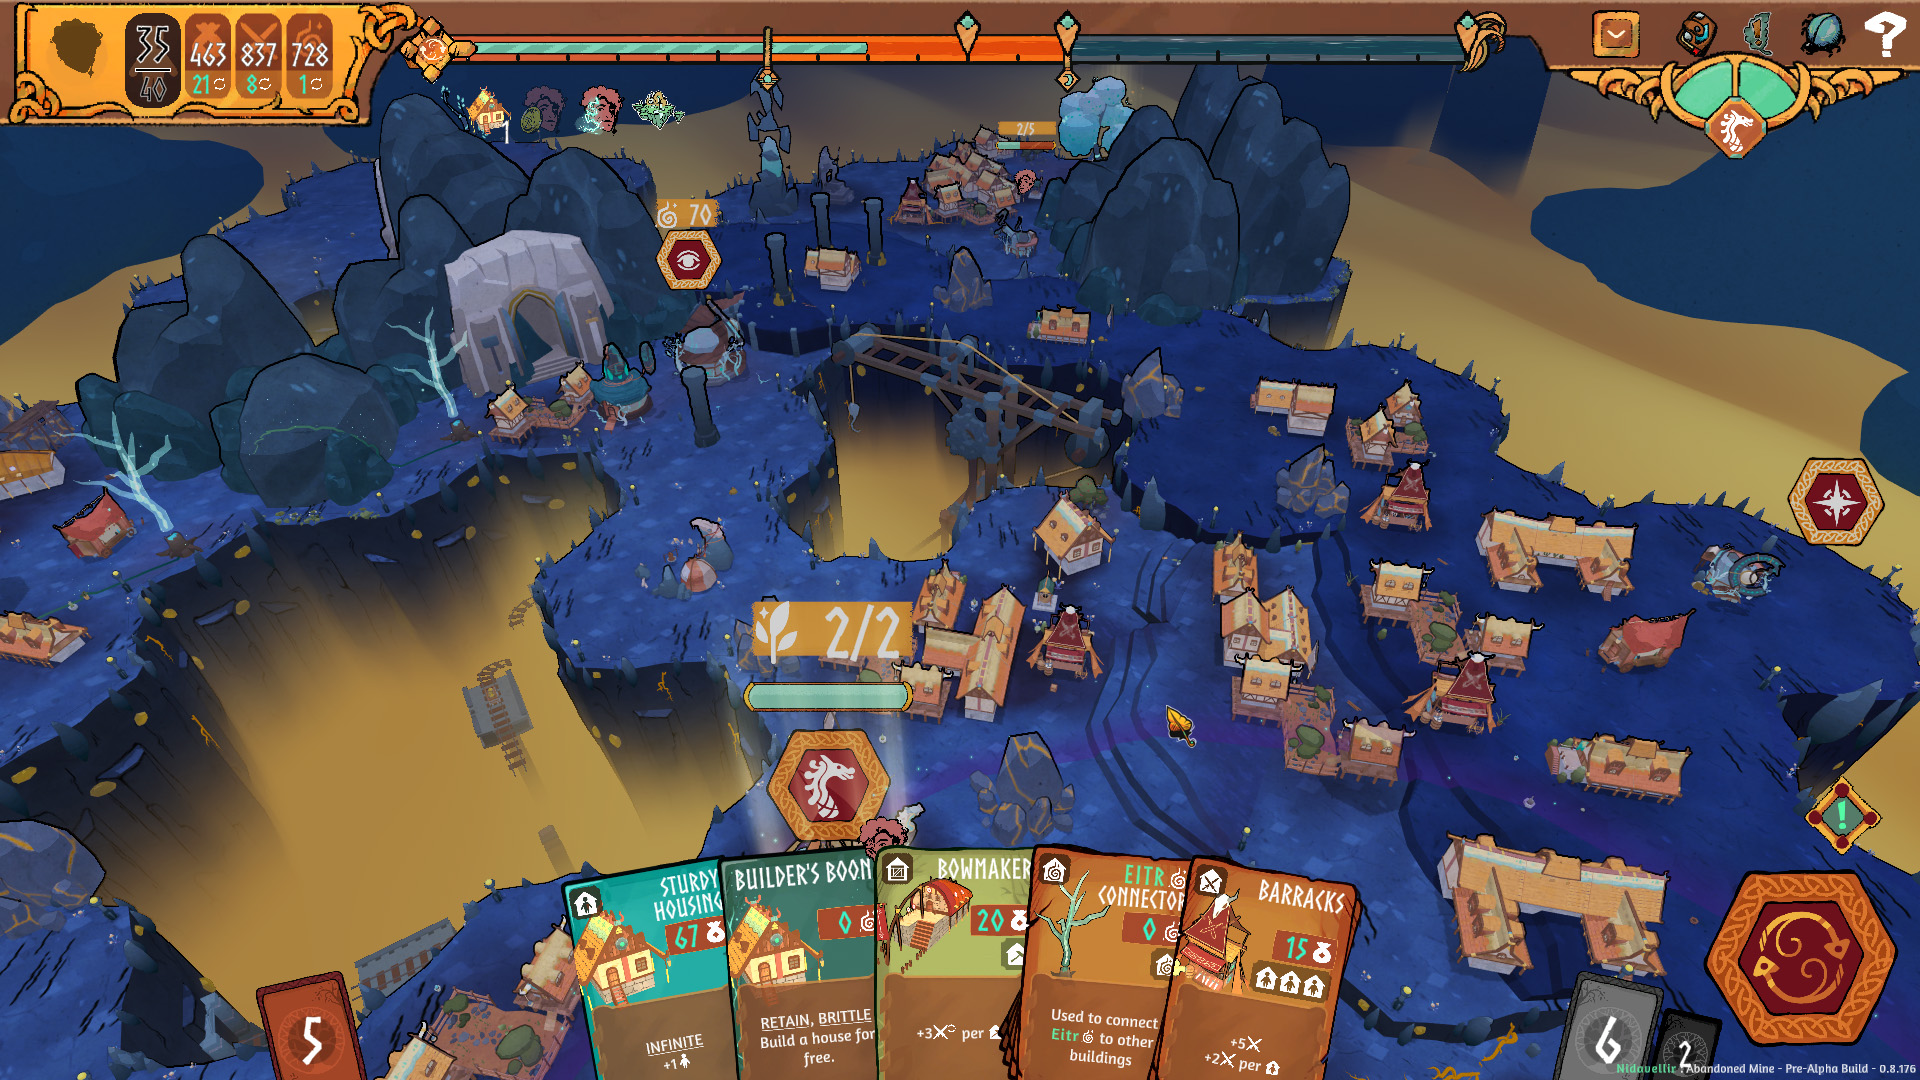 Roots of Yggdrasil Early Access Preview: Not A Place, A People